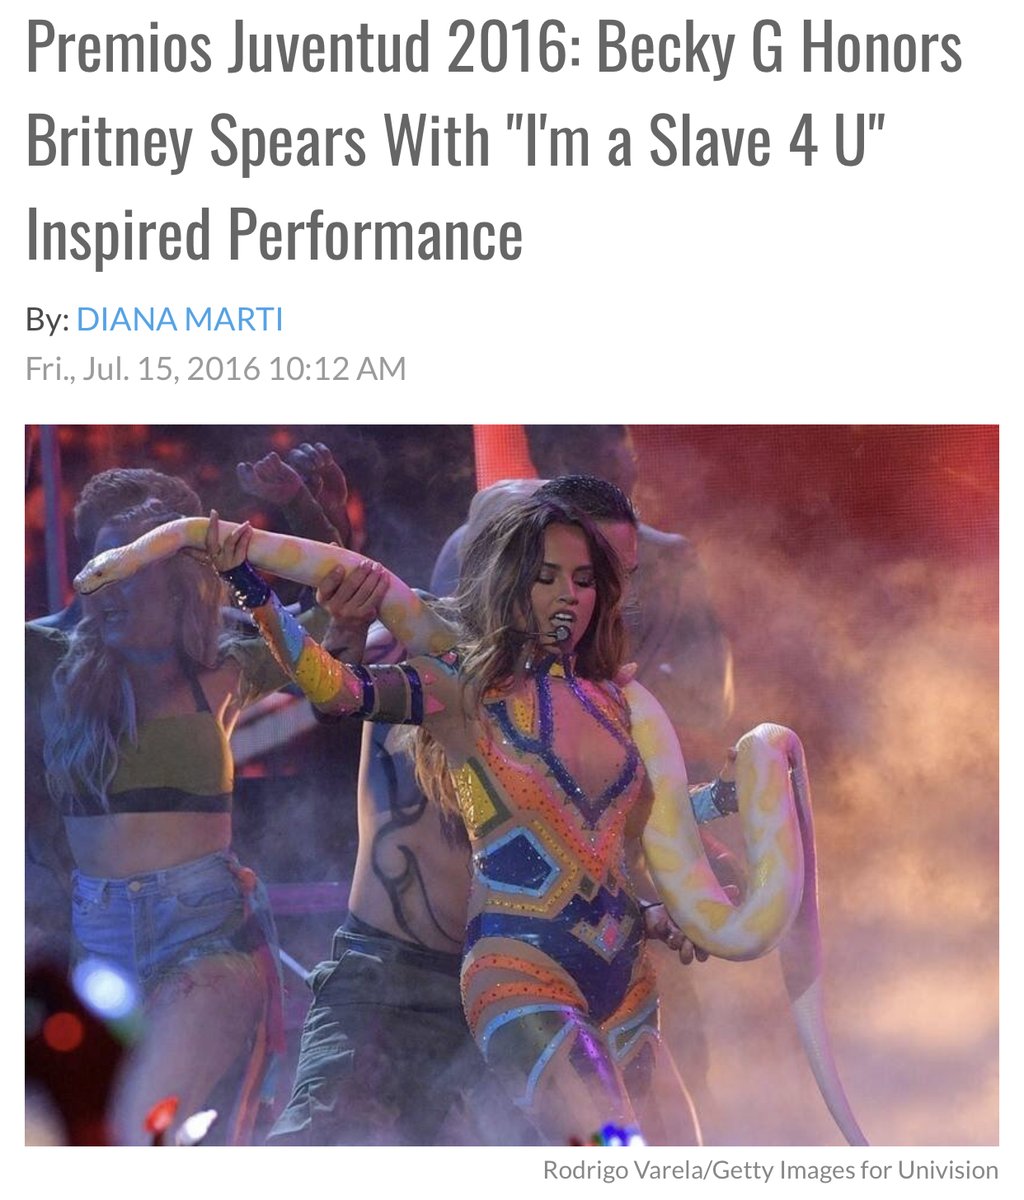 Becky G paid tribute to Britney's iconic "I'm a Slave 4 U" performance.